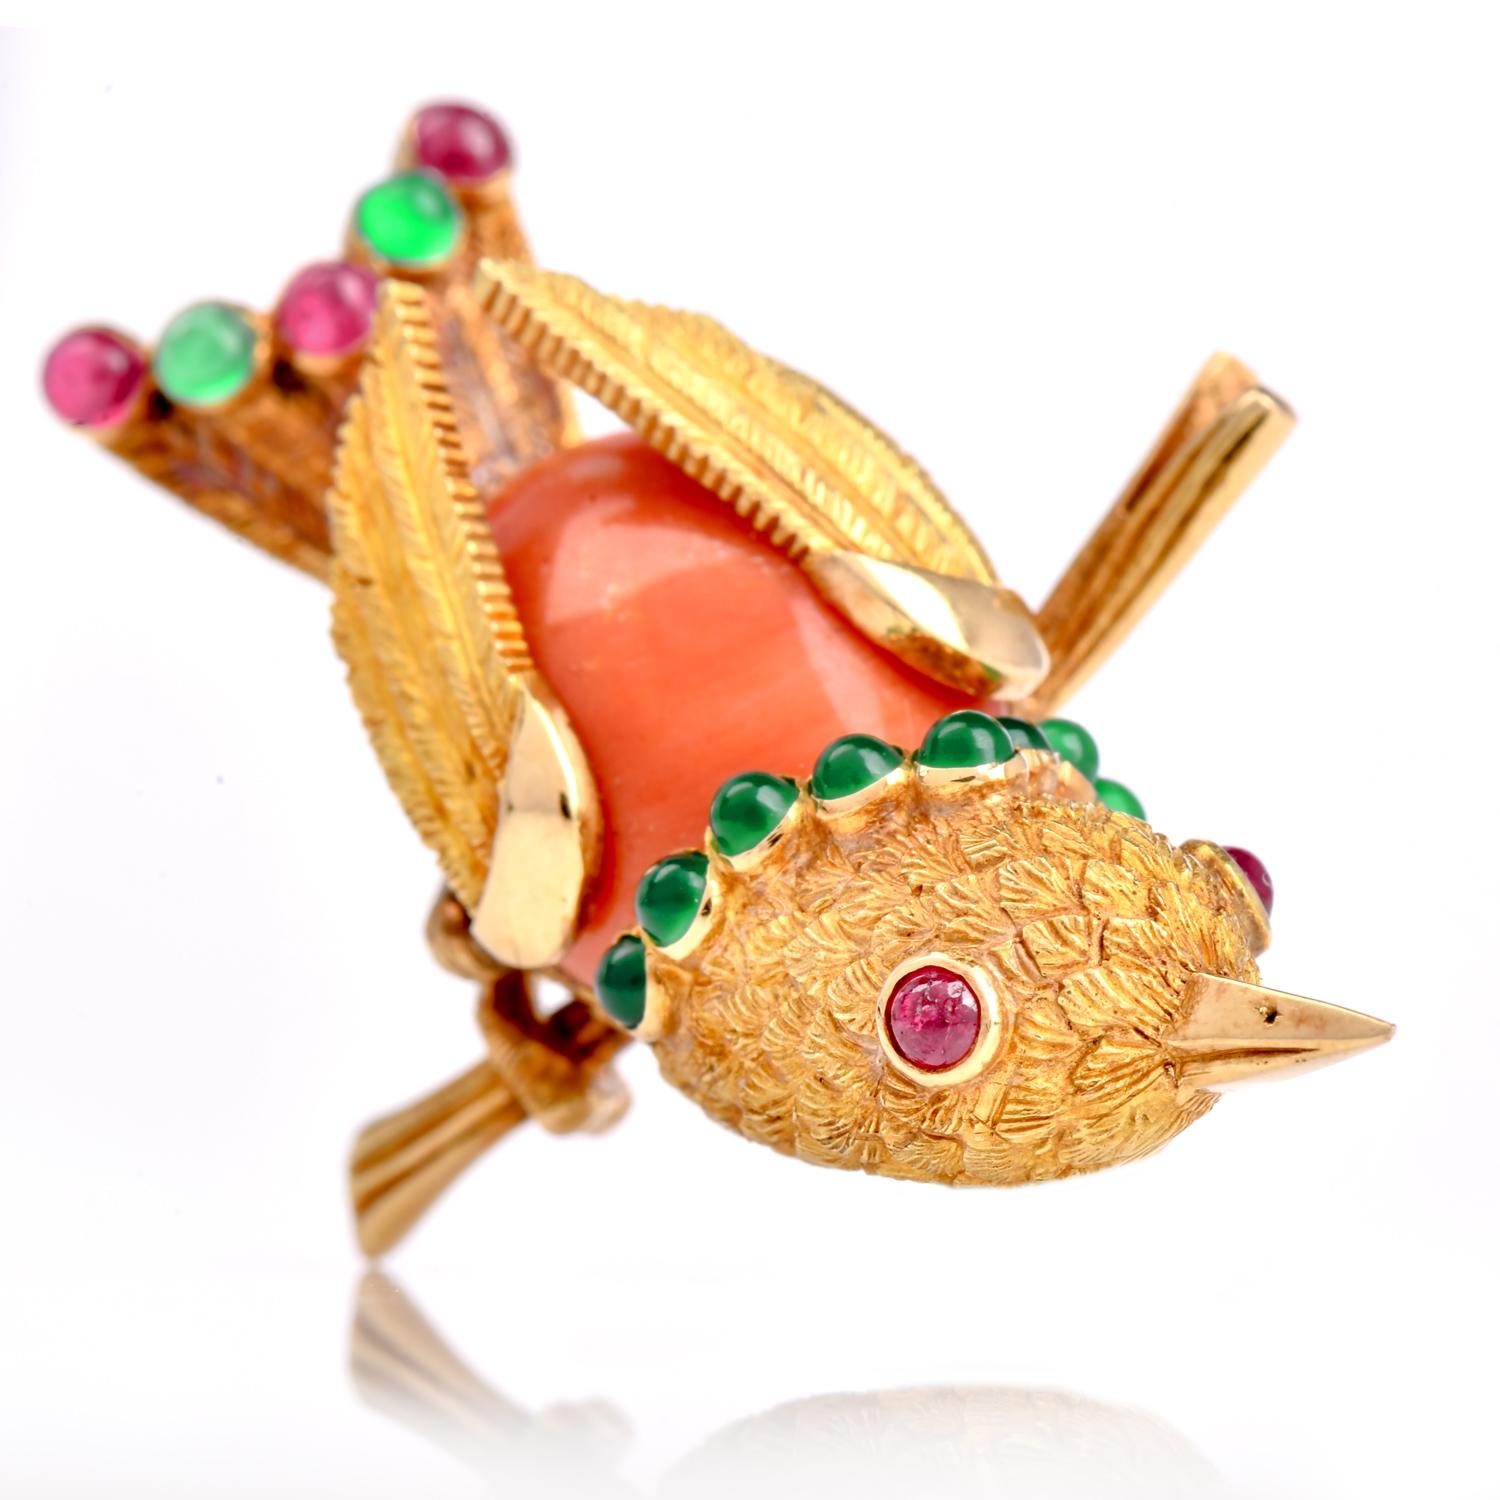 Presenting an exquisite vintage French brooch pin featuring a captivating bird motif, meticulously created from 18K yellow gold with a body crafted from rich coral and embellished with cabochon-cut rubies and emeralds, adding a touch of vibrant